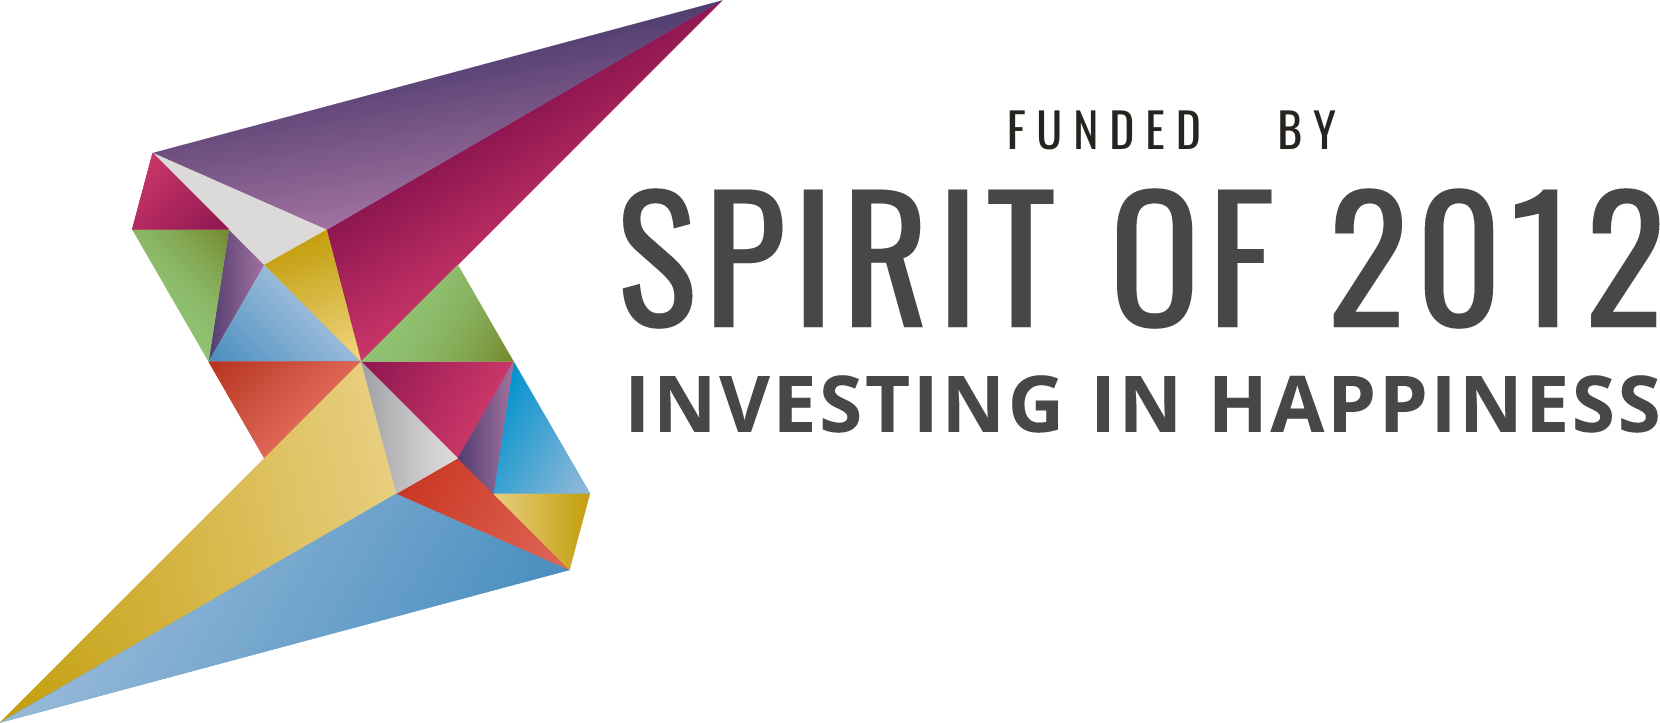 Funded by Spirit logo